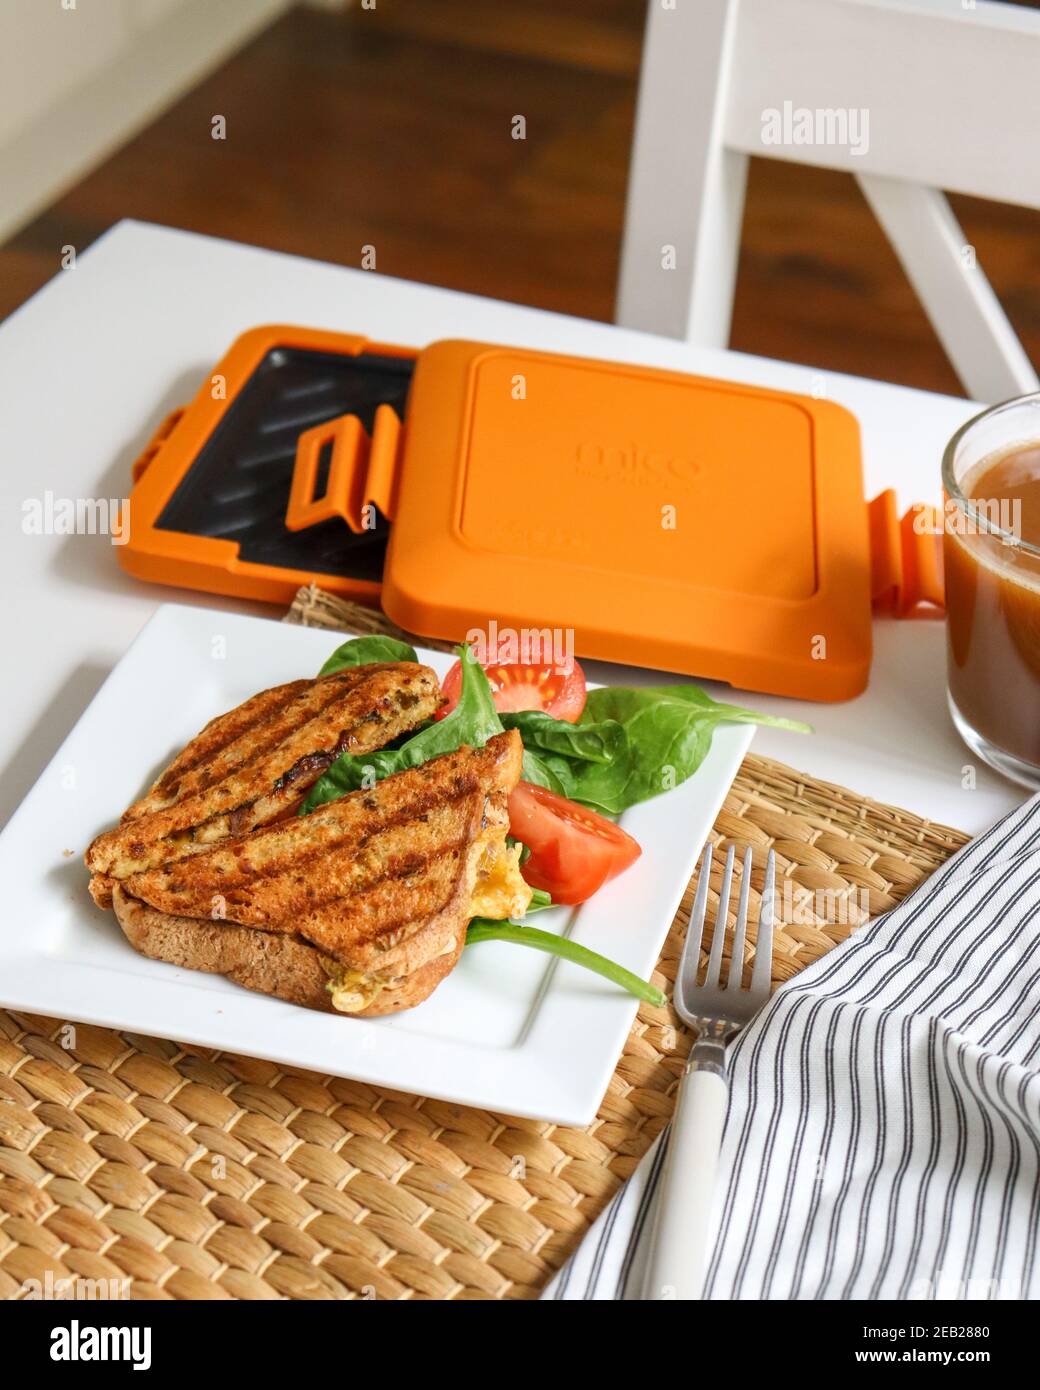 https://c8.alamy.com/comp/2EB2880/morphy-richards-mico-toastie-toasted-sandwiches-microwave-cookware-kitchen-food-preparation-cooking-snack-grilled-sandwich-ve-2EB2880.jpg